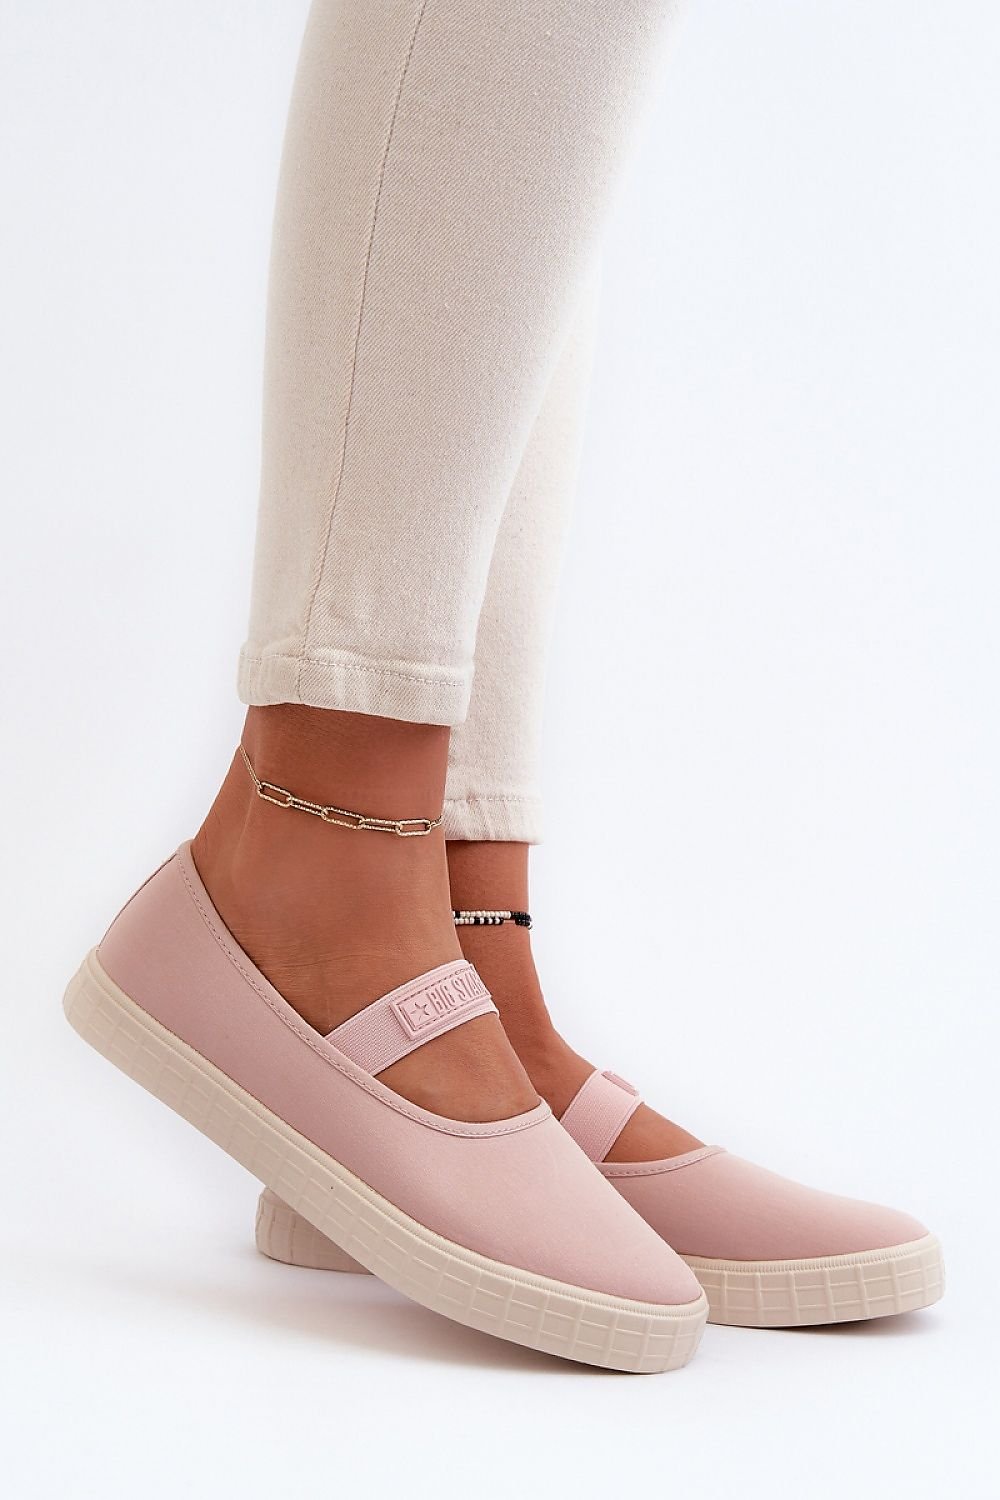 Ballerina Style  Shoes